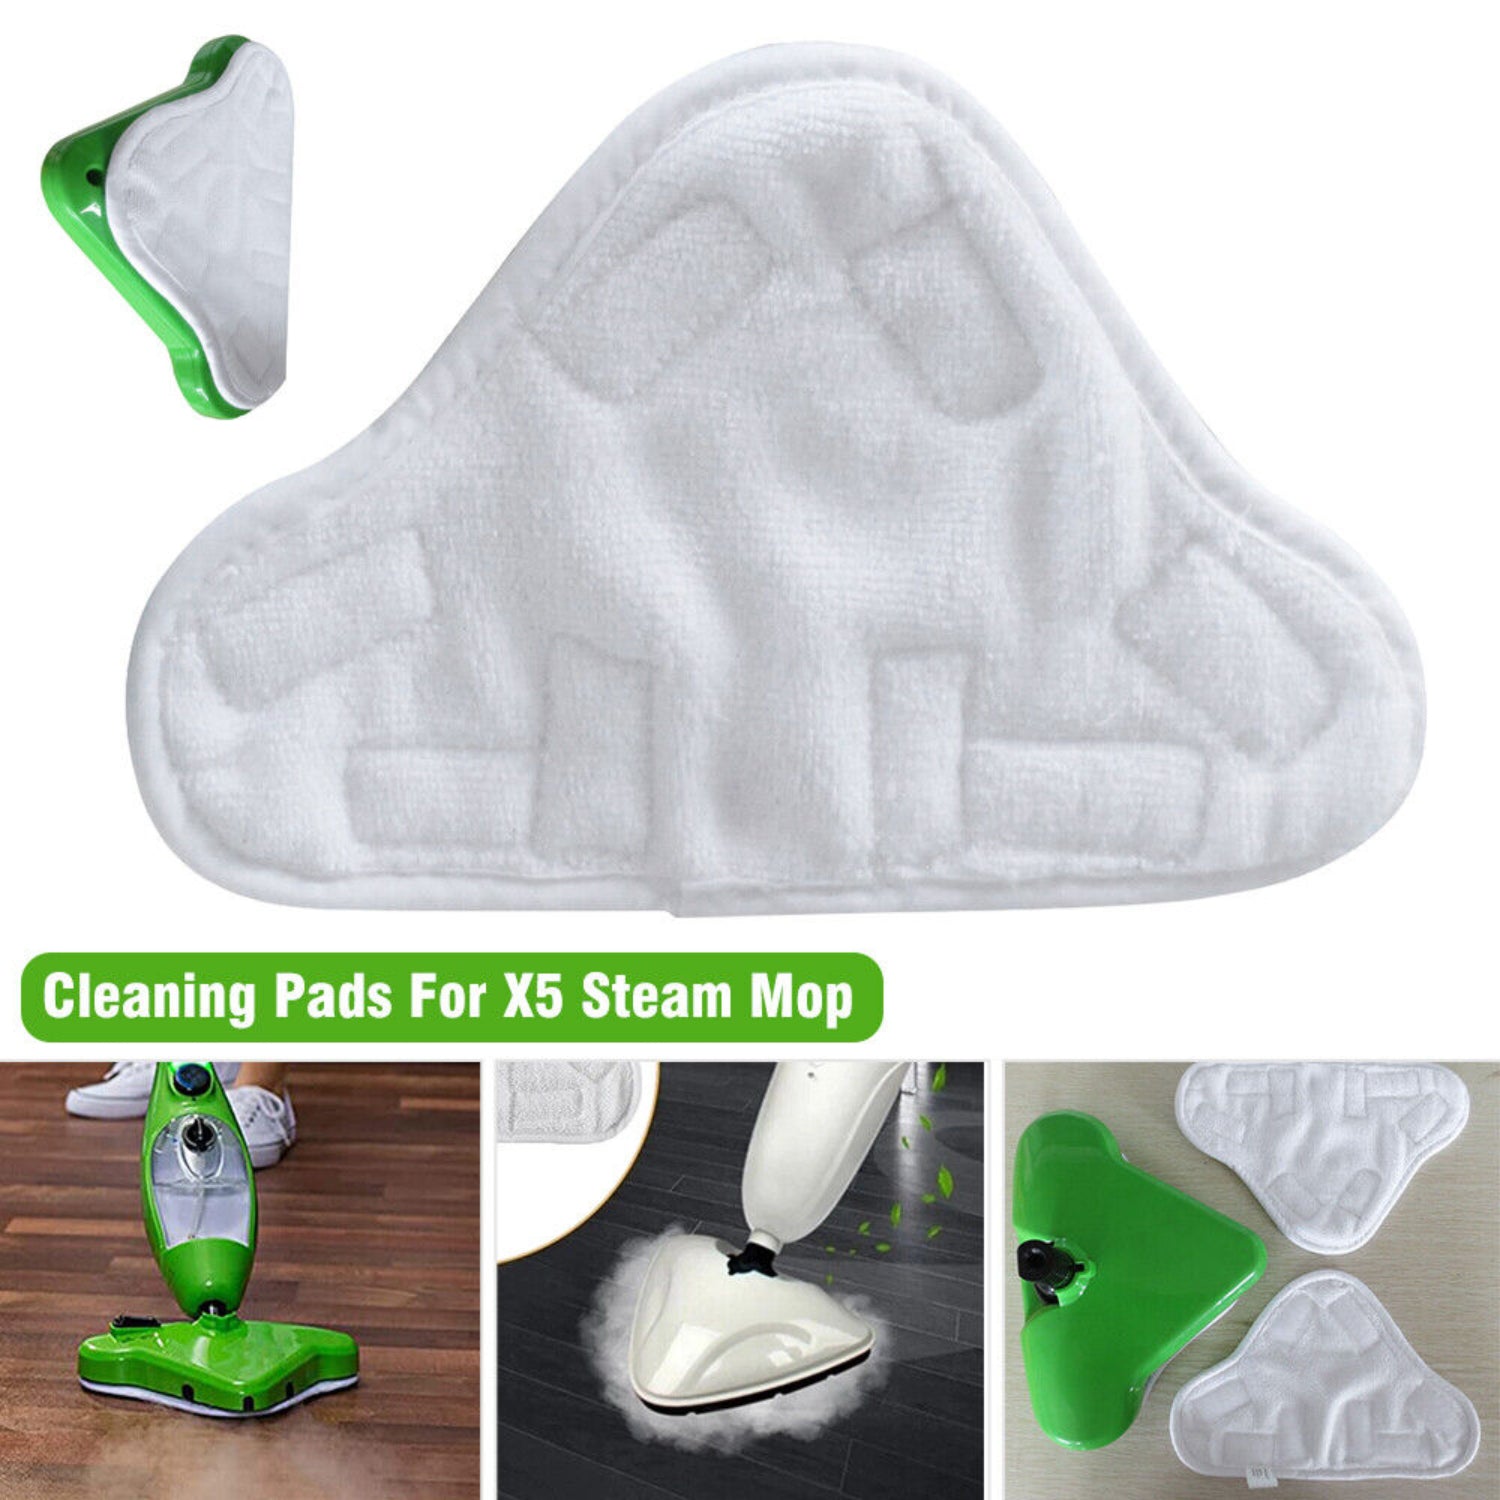 5PCS Stick On White Washable Cleaning Pads Microfiber For X5 Steam Mop H20 H2O - SILBERSHELL